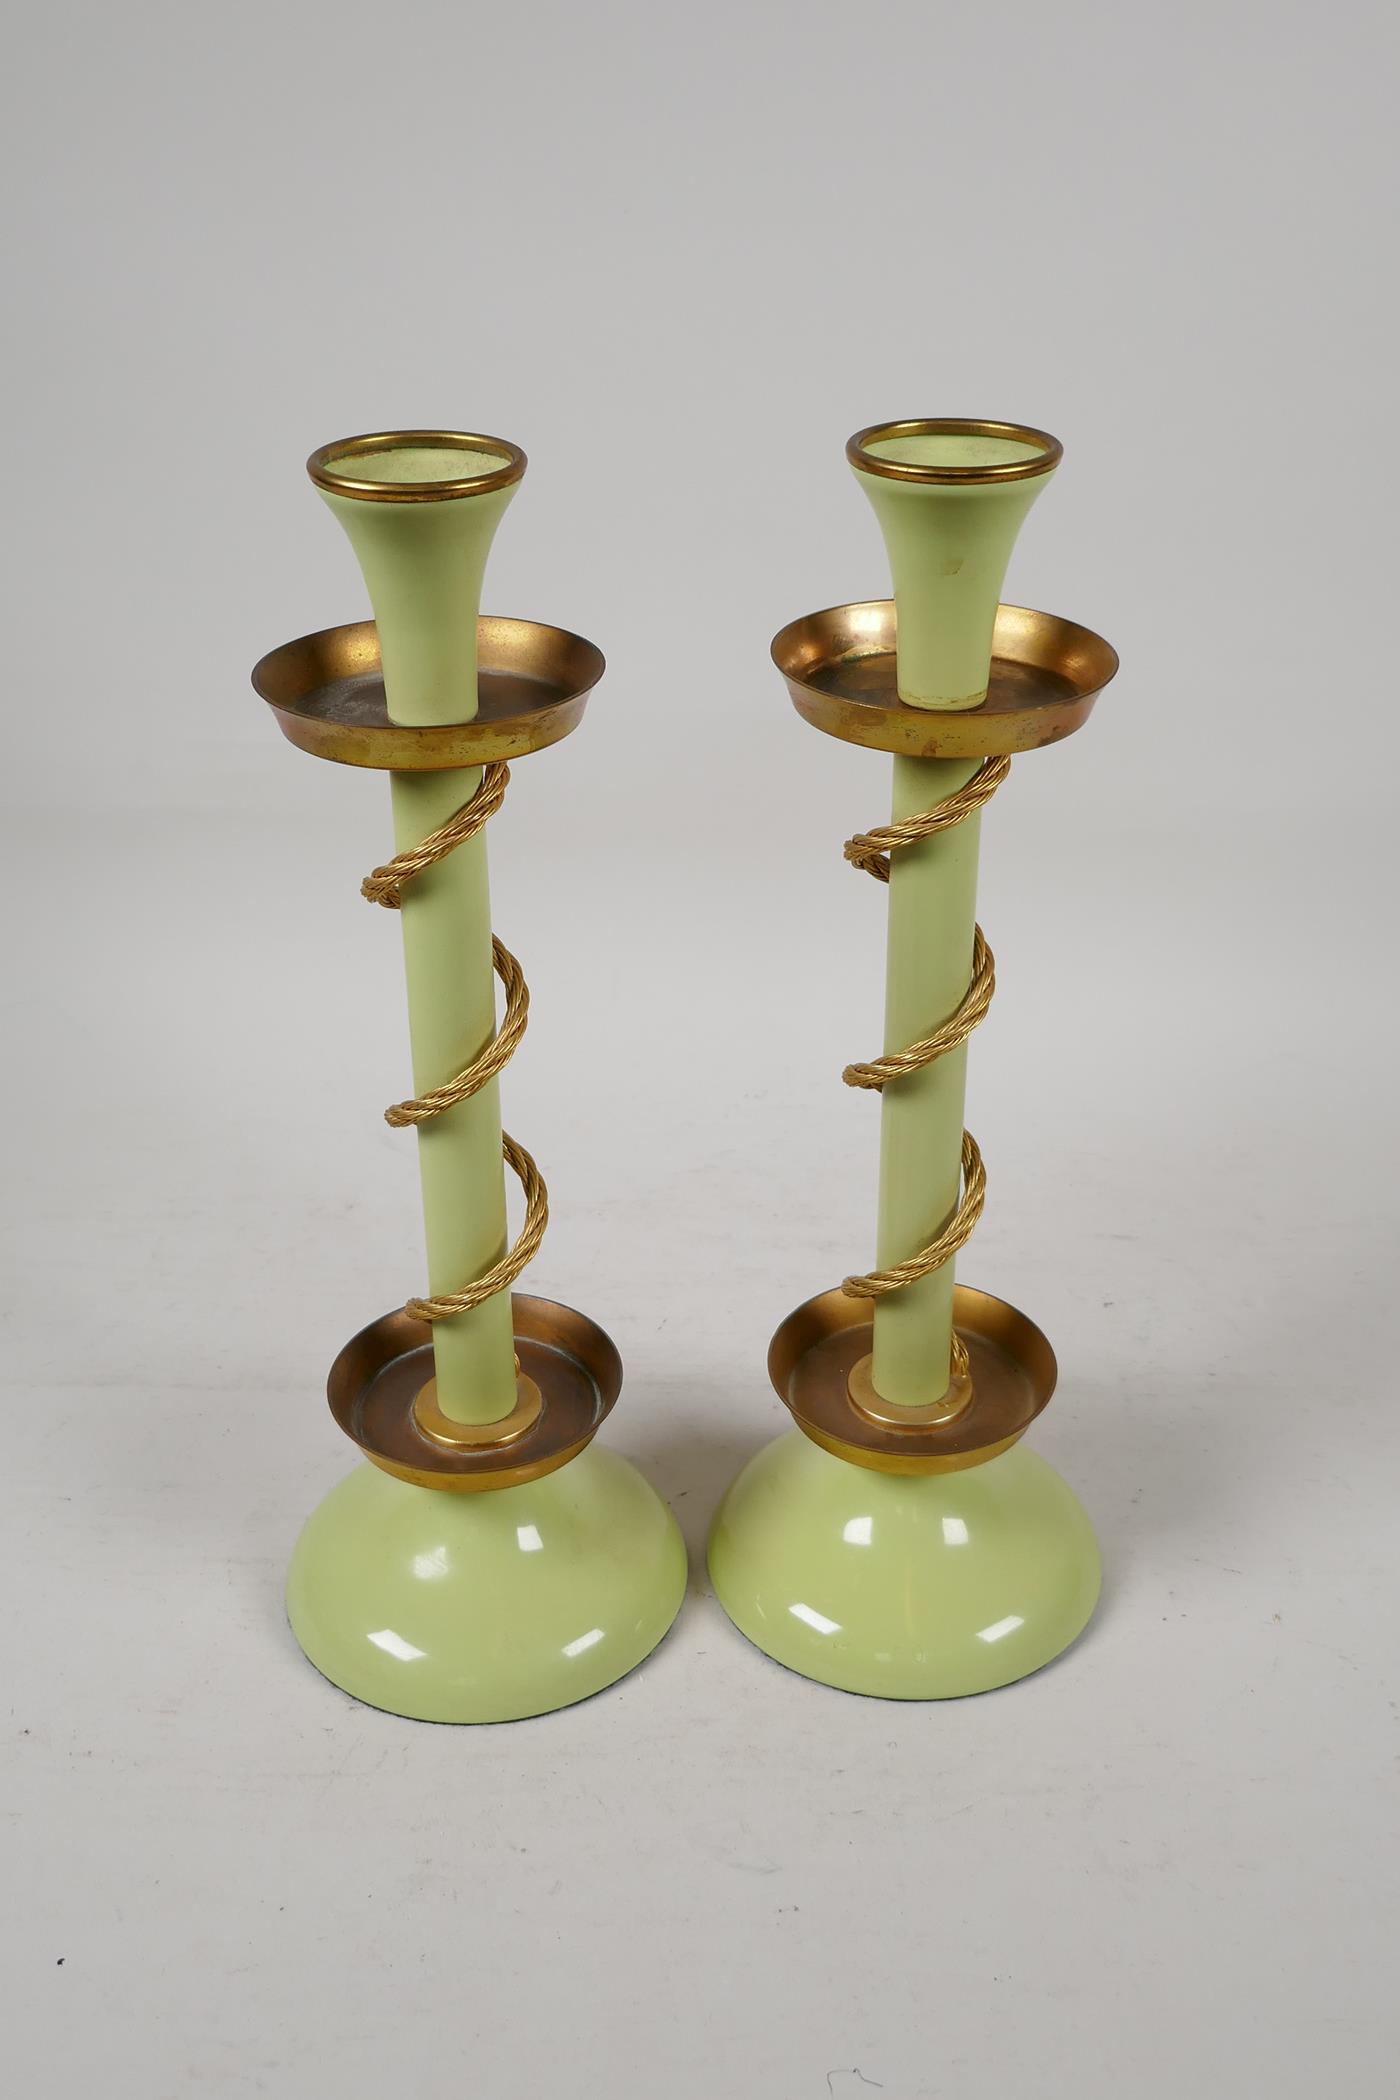 A pair of Bilston enamel candle sticks, the stem entwined with gilt metal ropework, 11½" high - Image 2 of 4